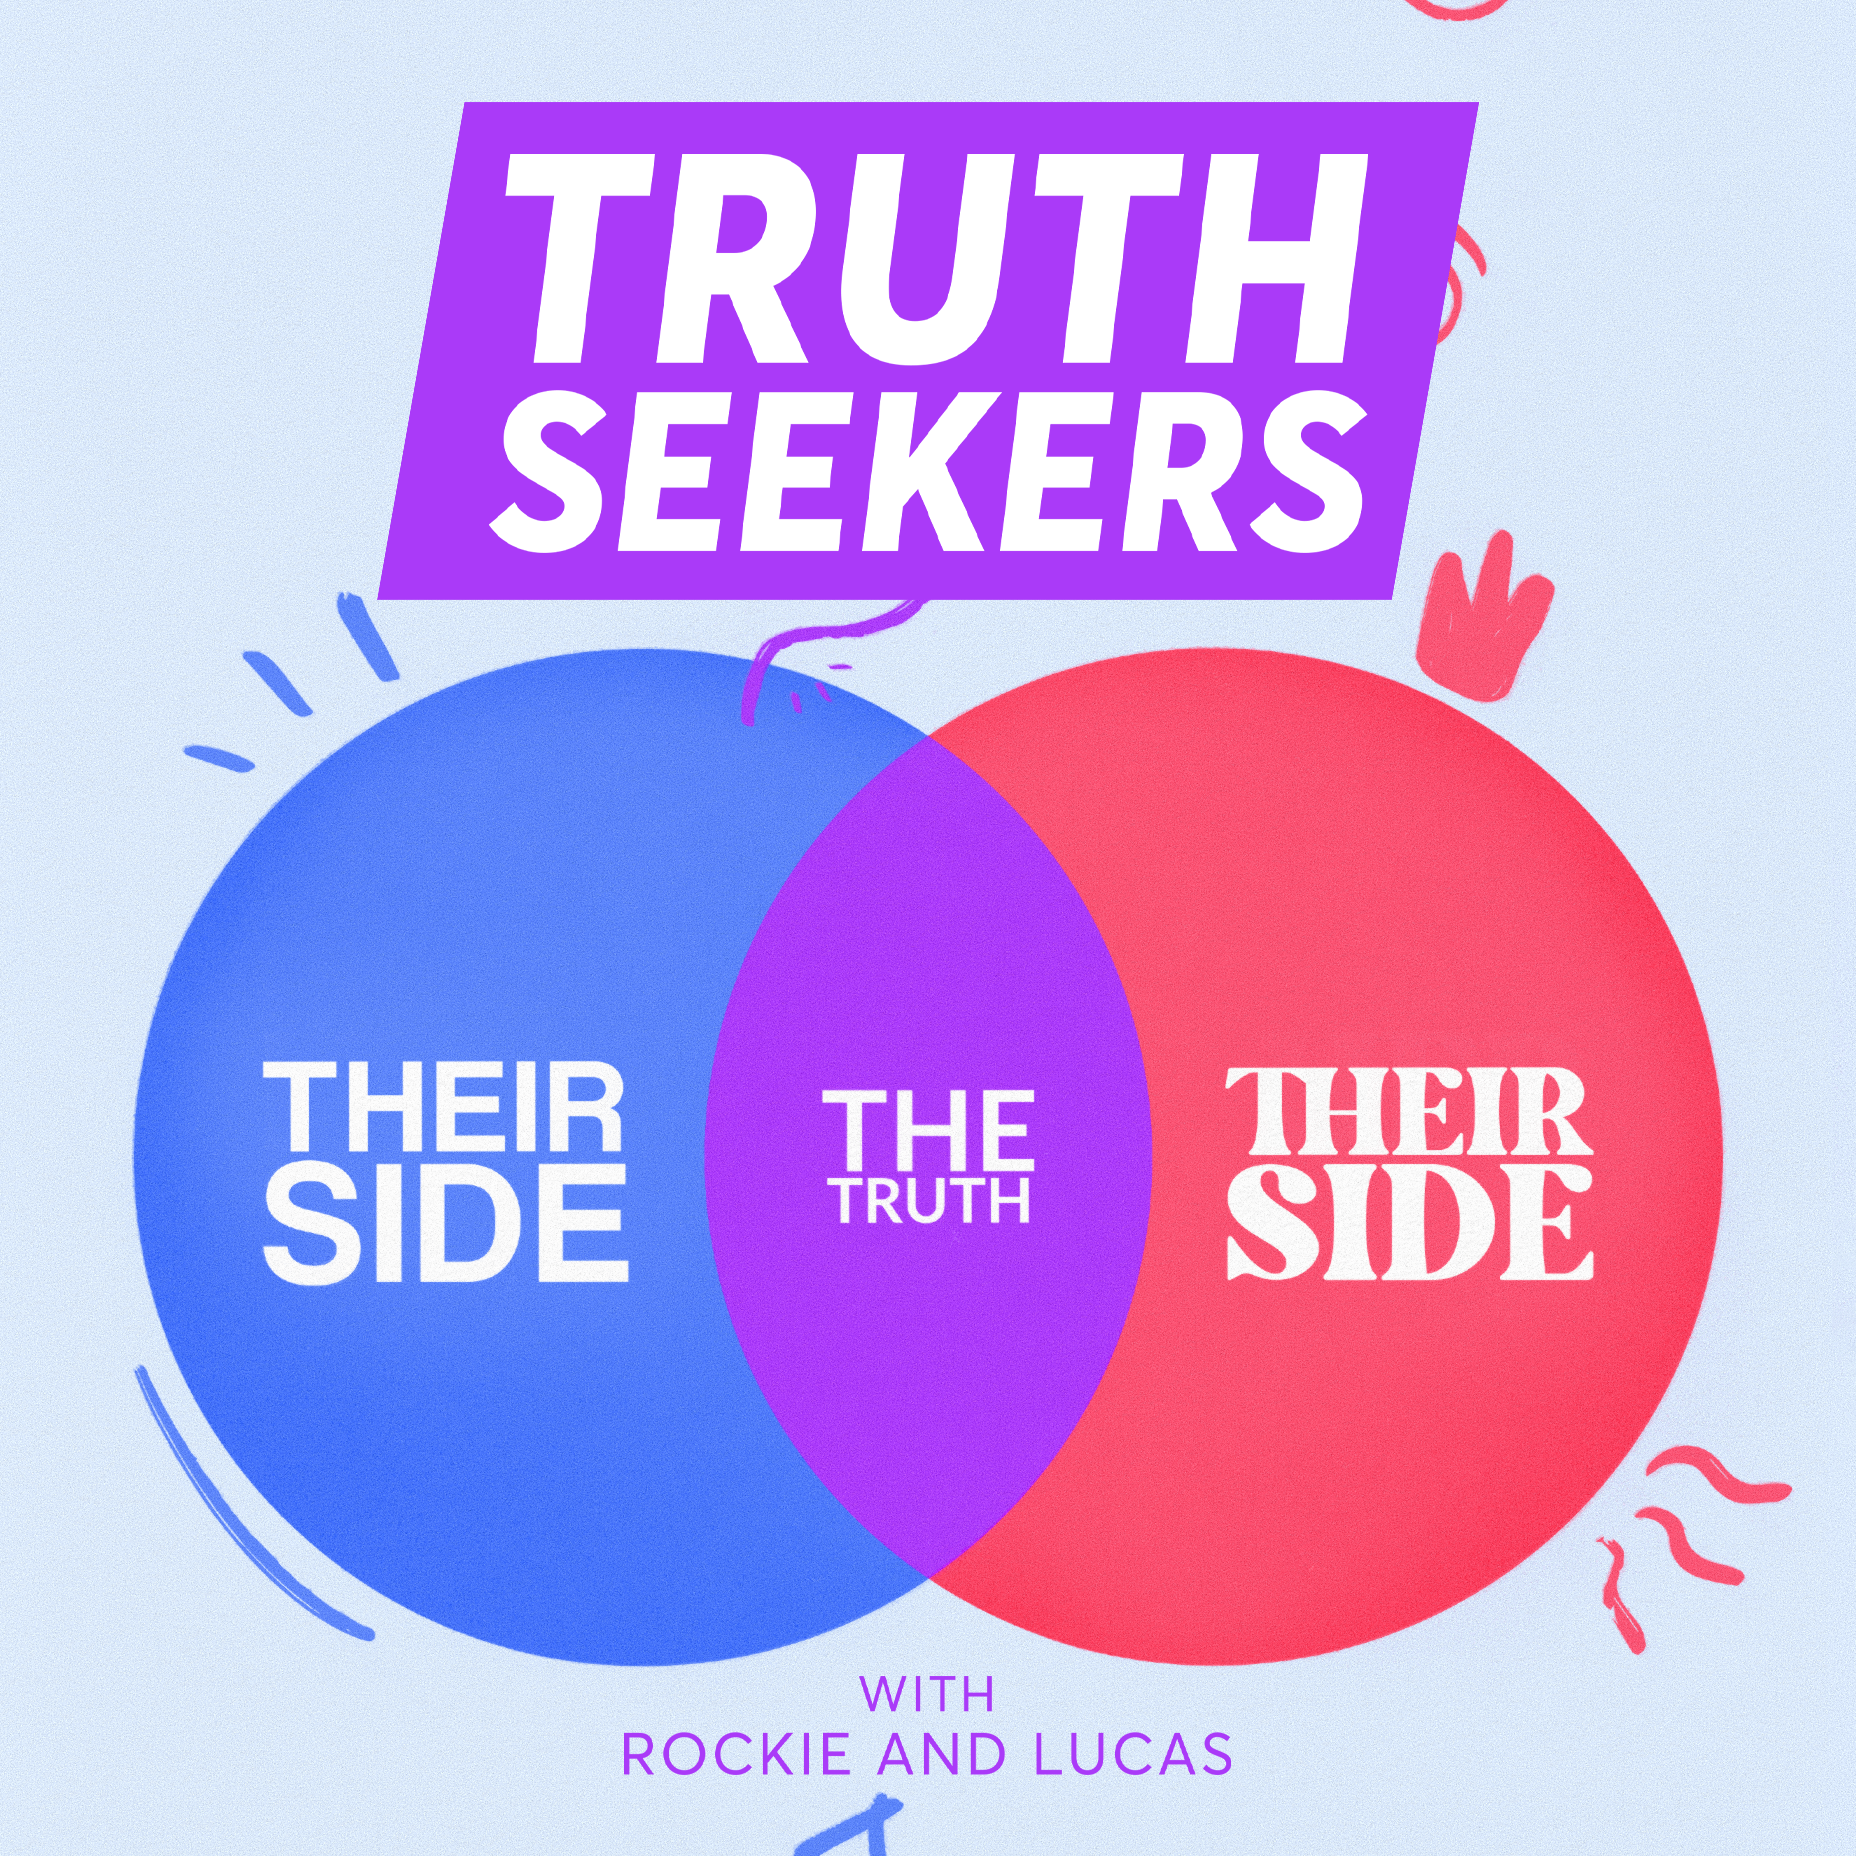 TRUTH SEEKERS WITH ROCKIE and LUCAS